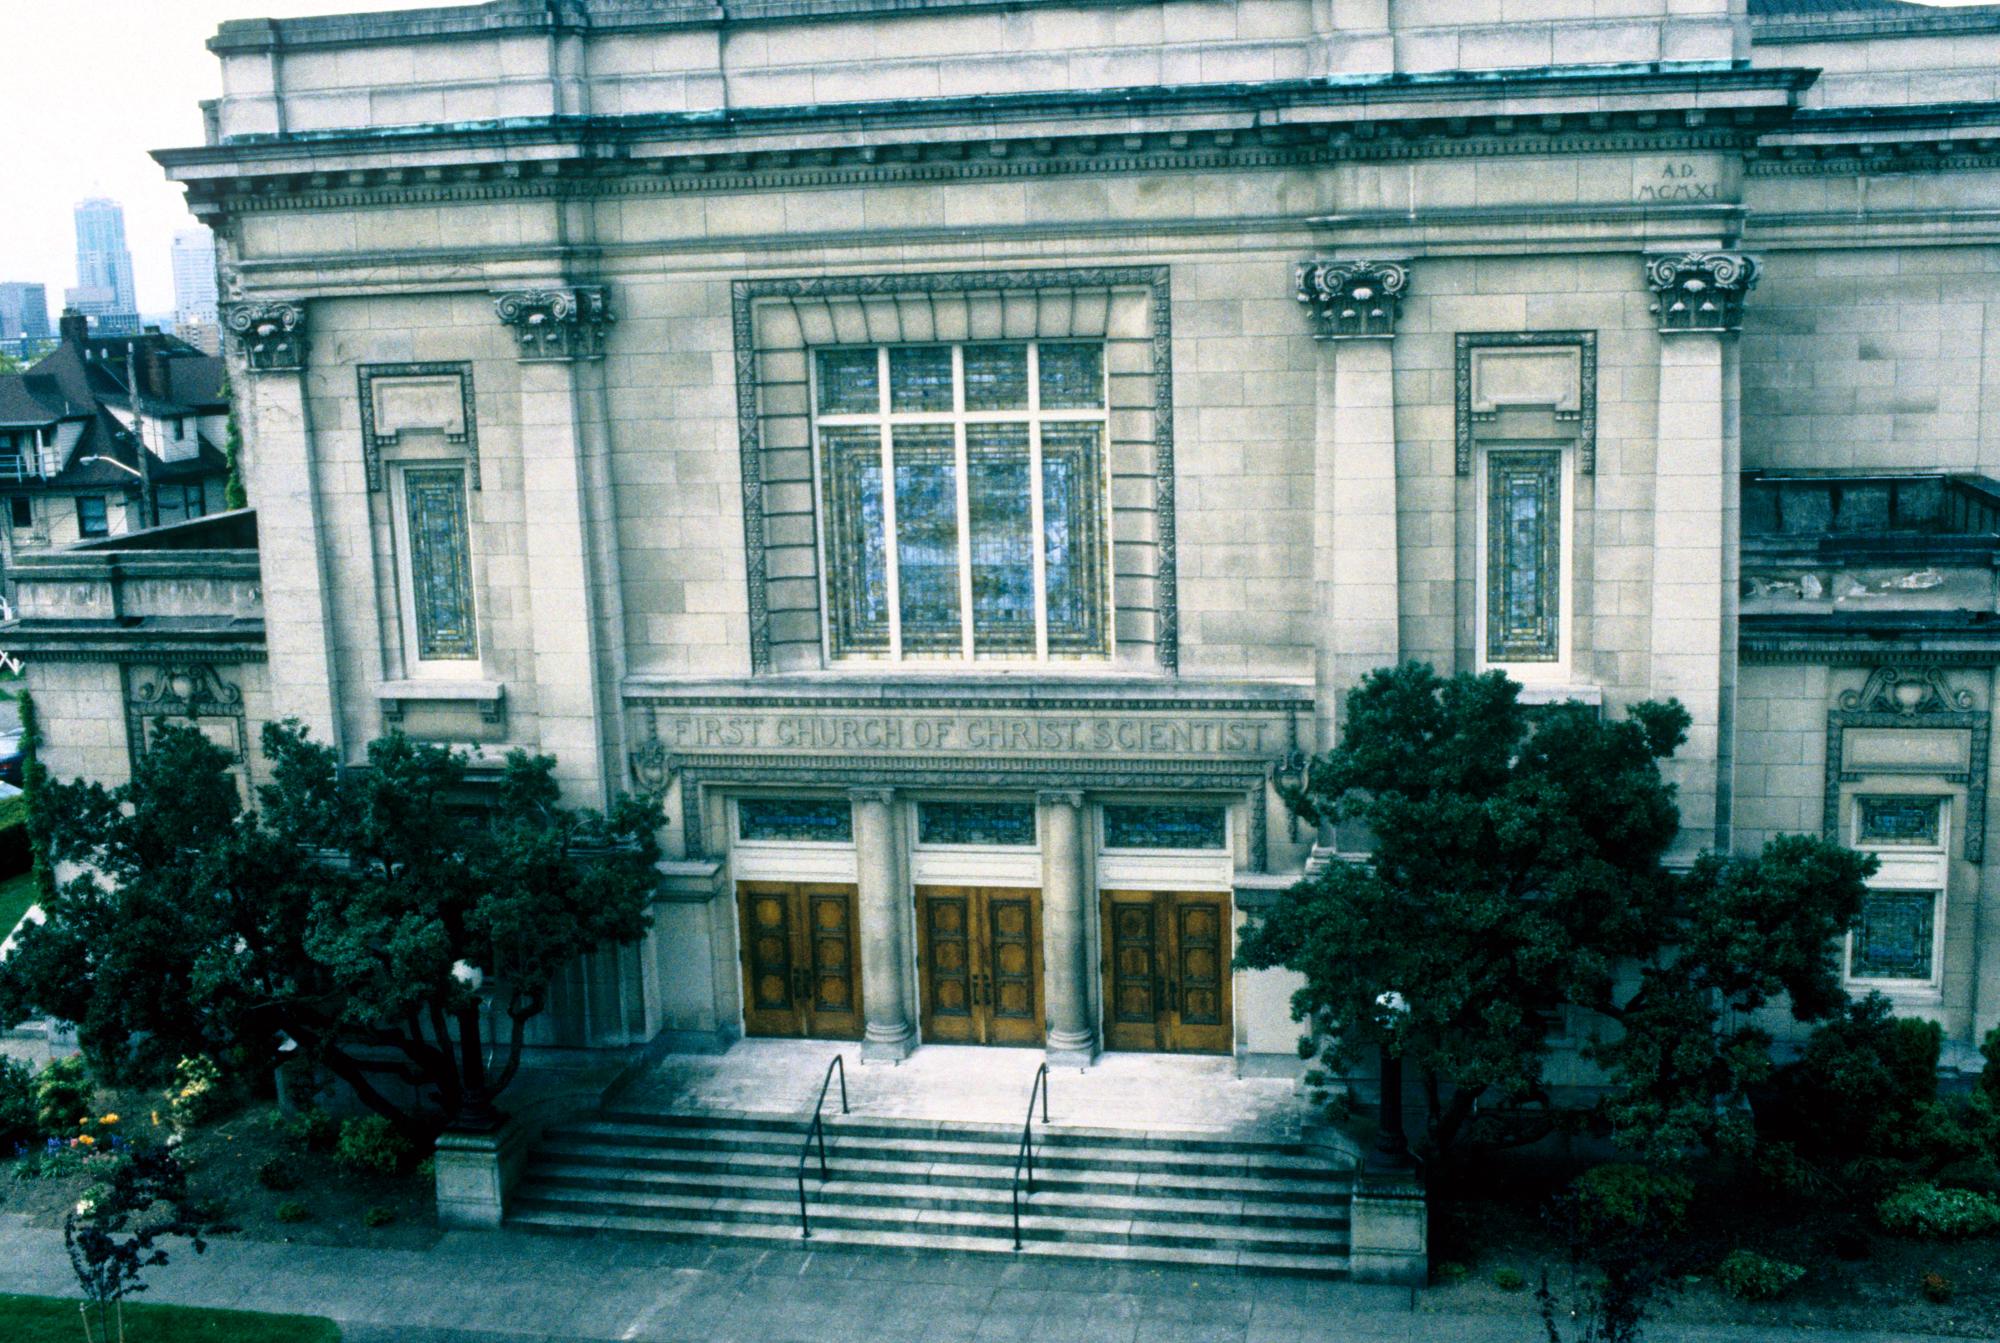 Seattle (1993) - First Church Of Christ